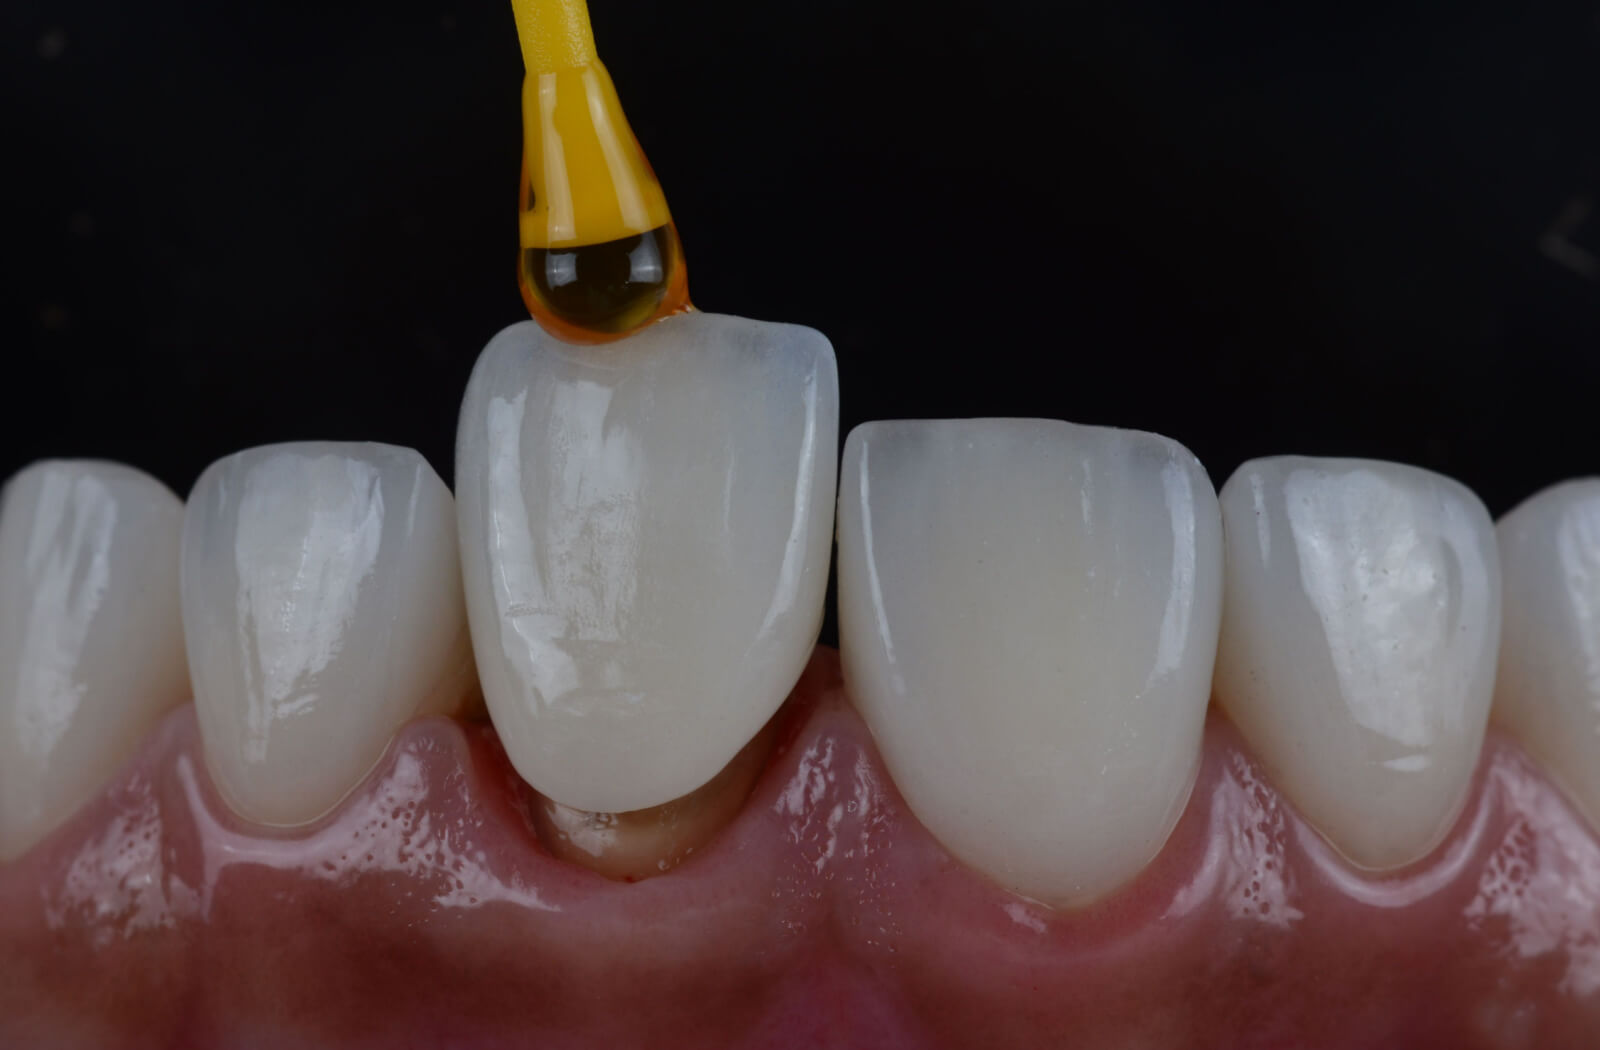 How Strong Are Dental Crowns?